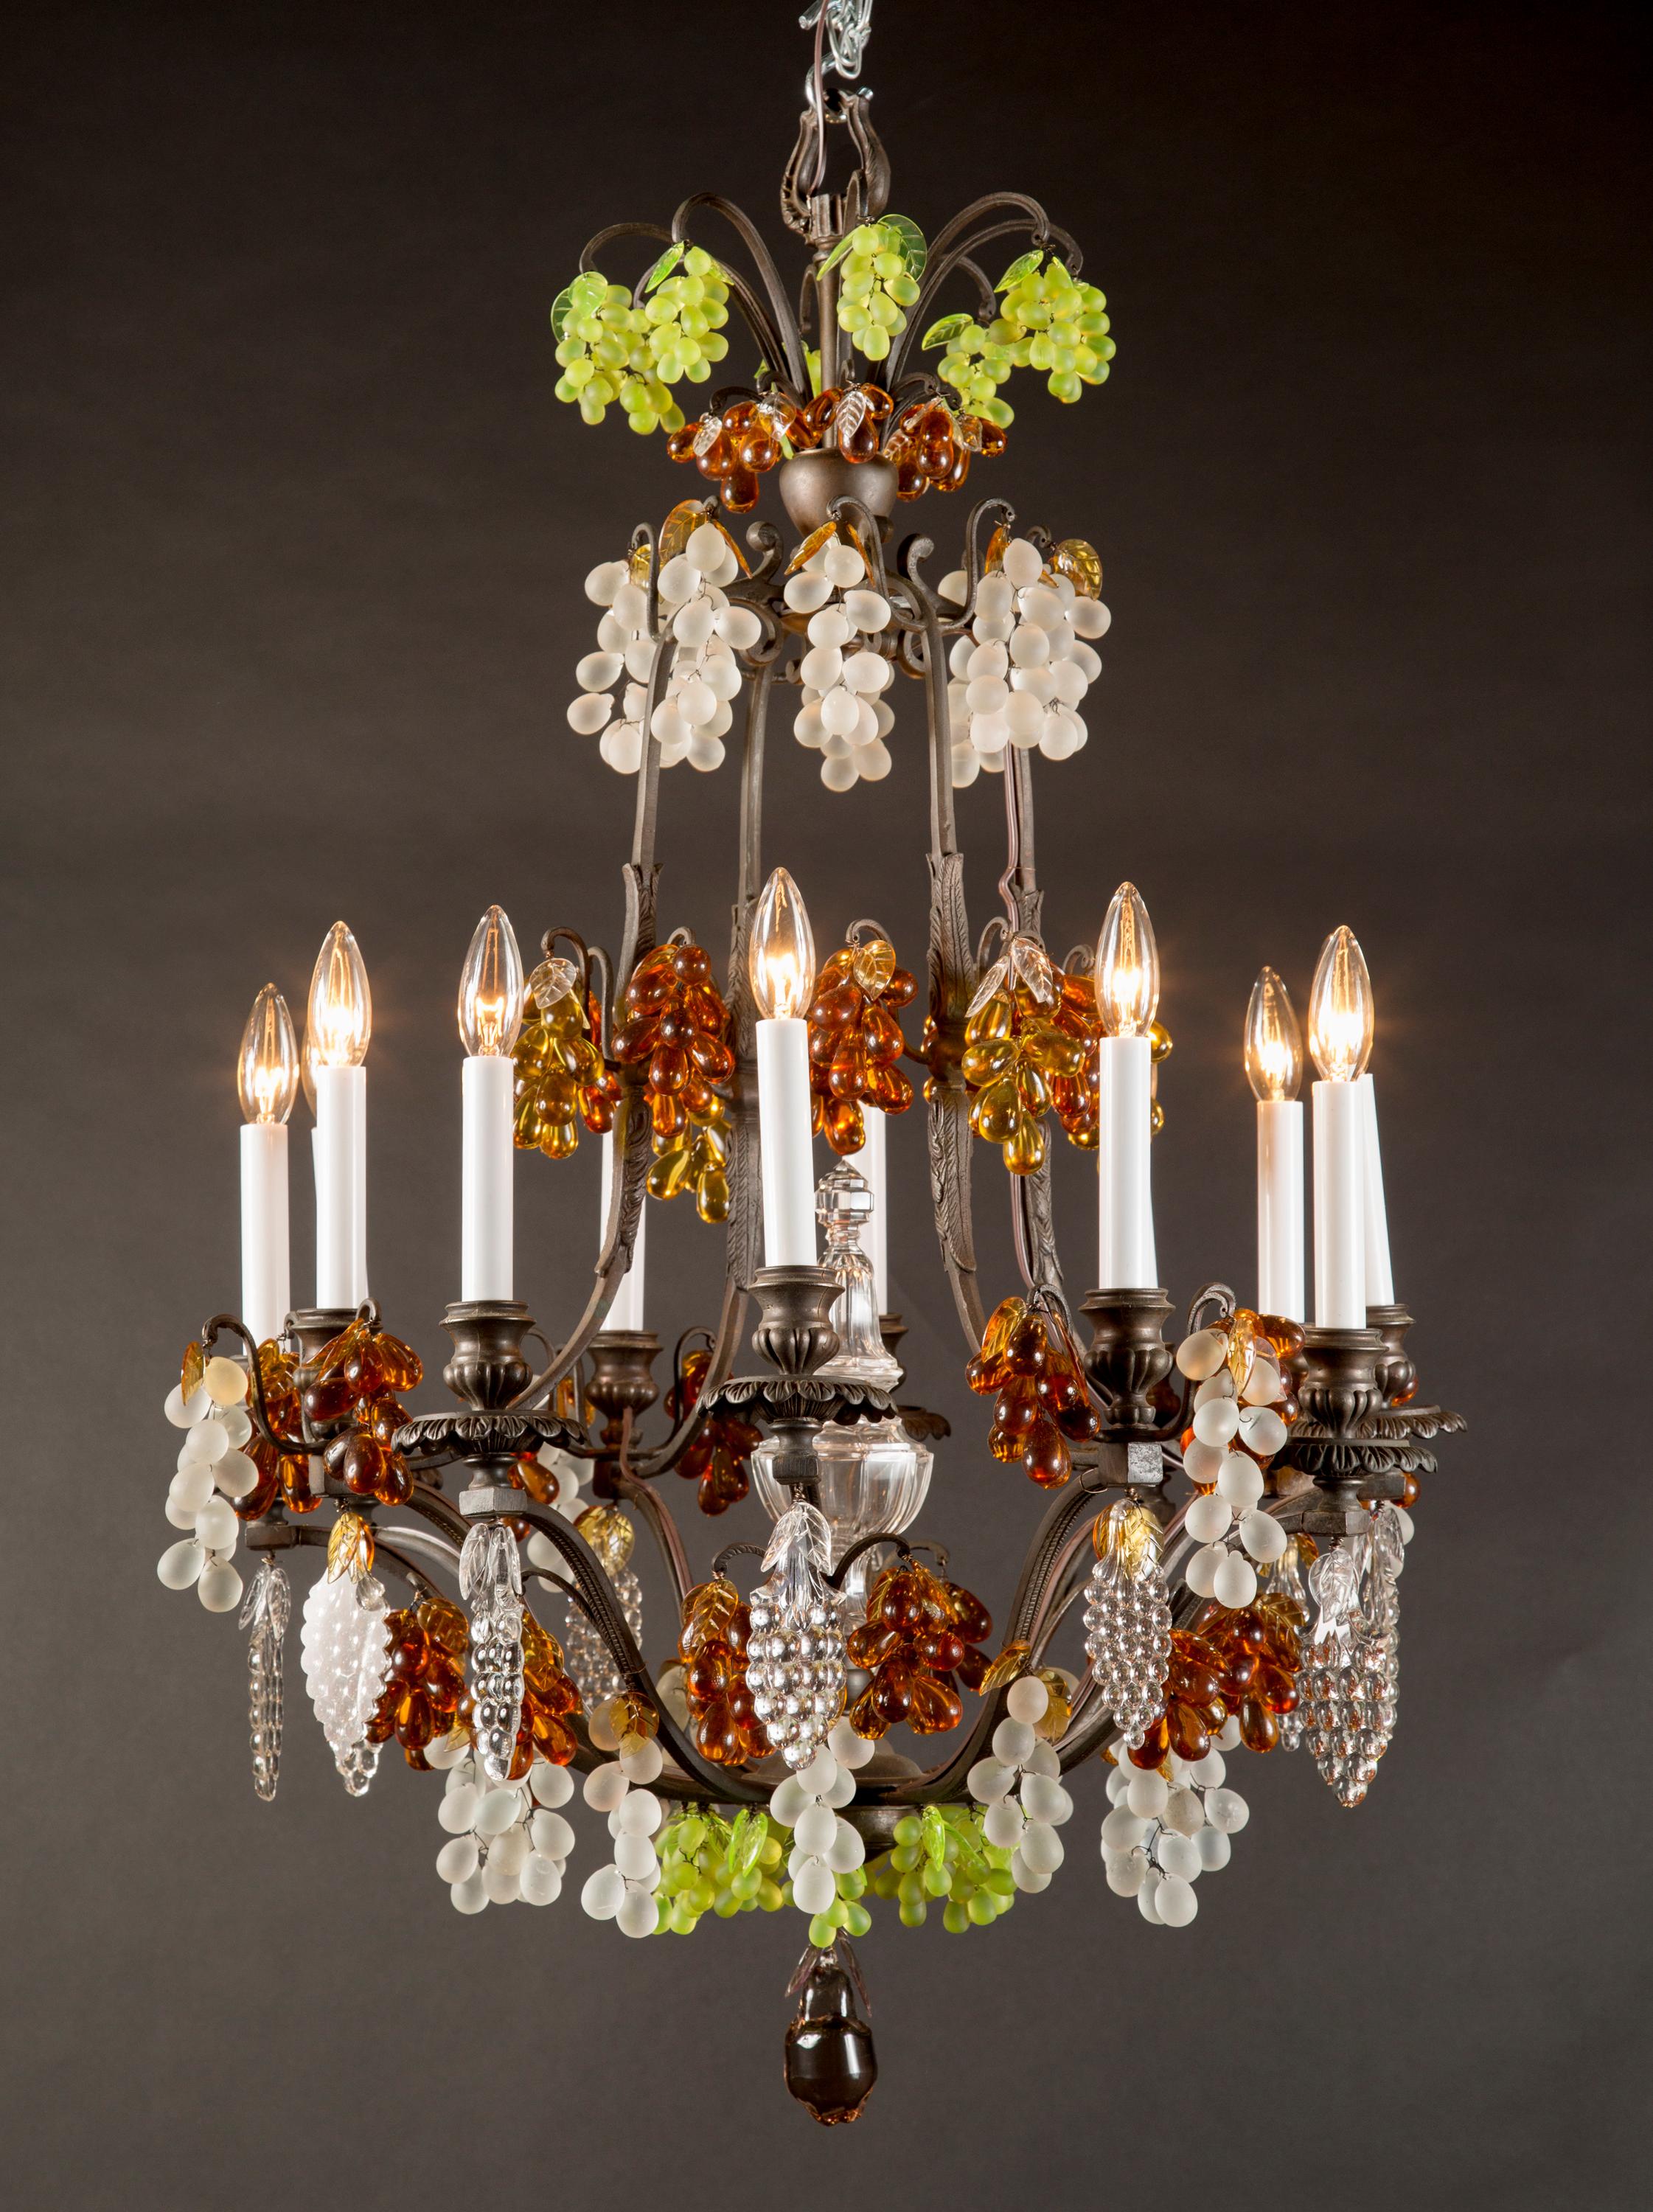 This beautiful pair of French patinated bronze chandeliers feature the bird cage shape Classic to the Louis XV style. The pair is draped with bunches of colored crystal grapes and adorned with finely etched crystal leaves. A large clear crystal